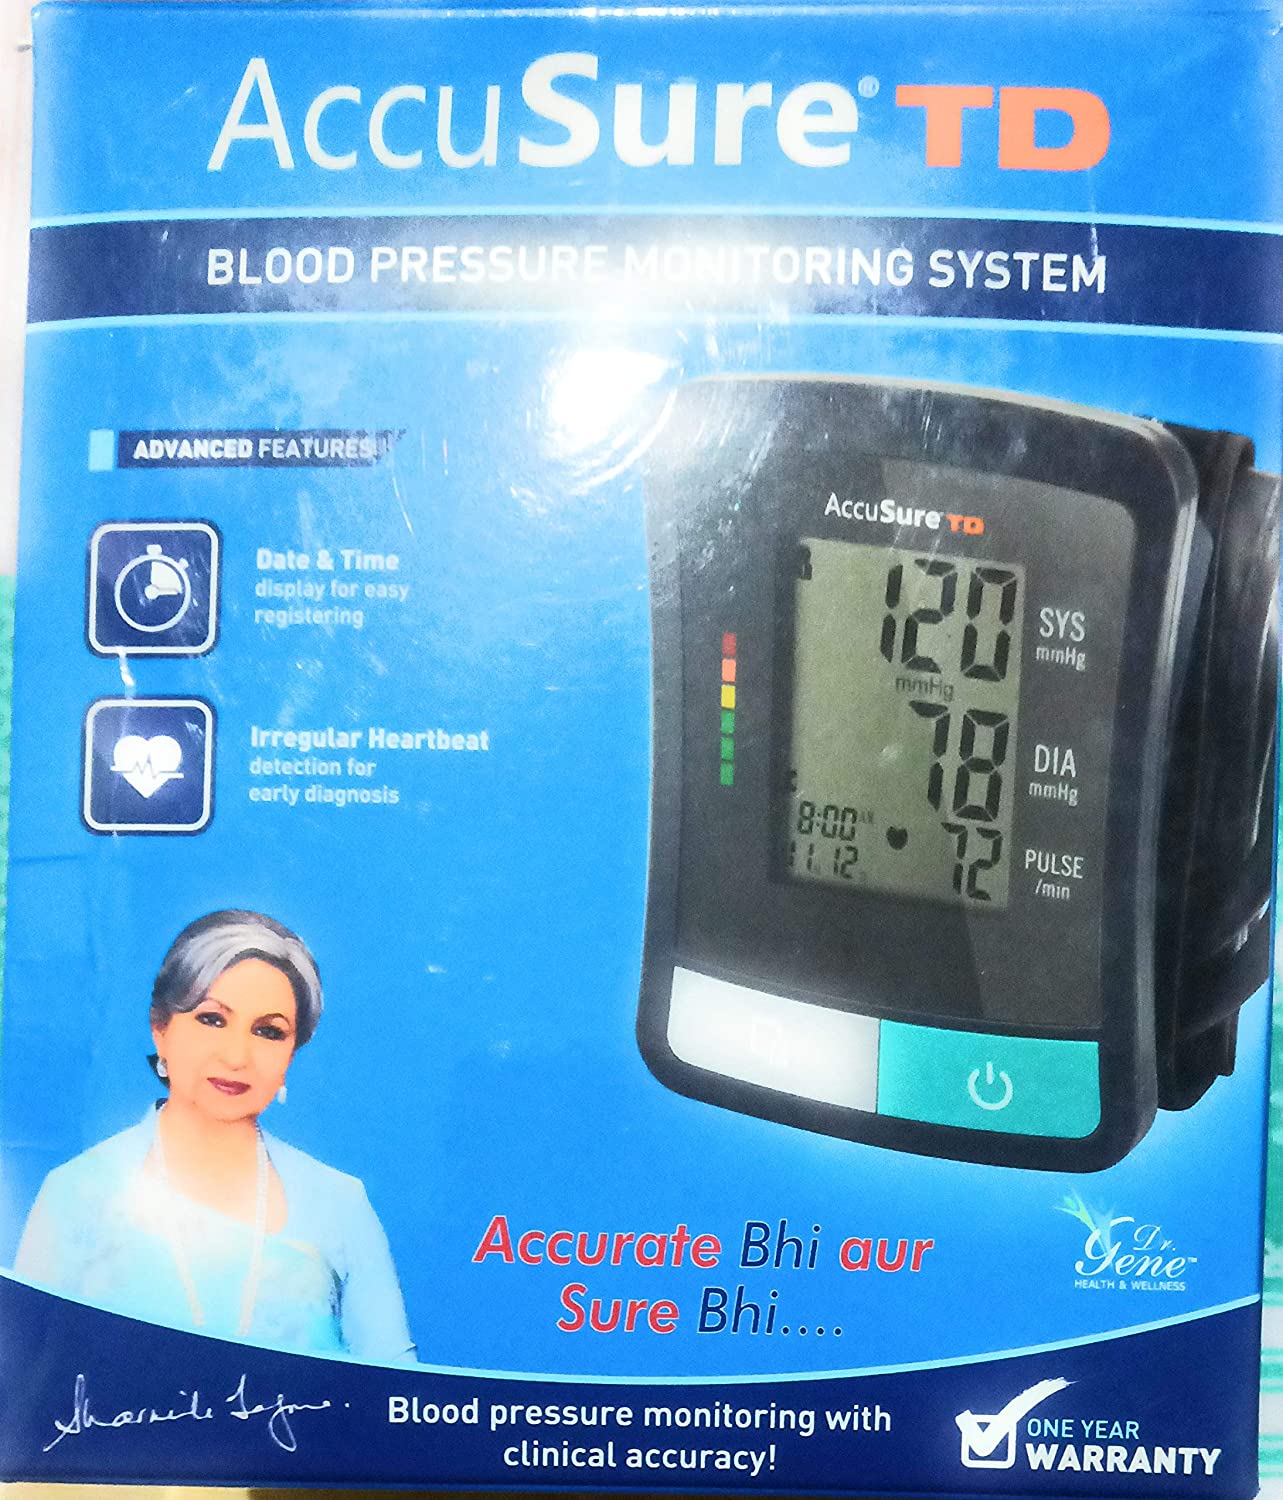 Blood Pressure apparatus - AccuSure TD Automatic Blood Pressure Monitoring System